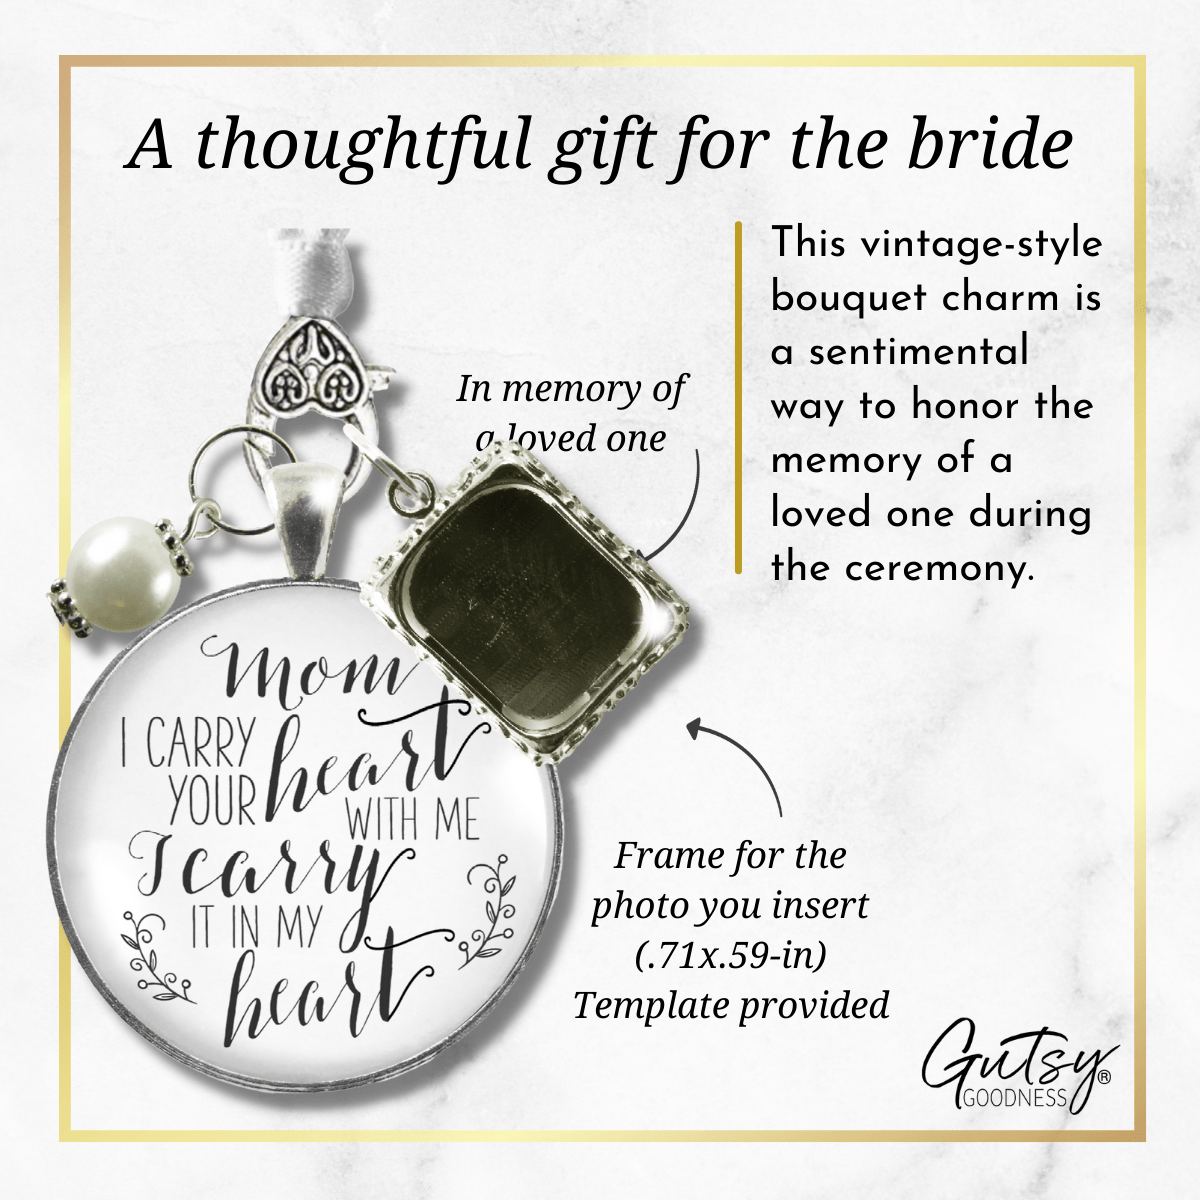 Bridal Bouquet Photo Charm Mom I Carry Your Heart Wedding White Silver Finish Memory - Gutsy Goodness Handmade Jewelry Gifts